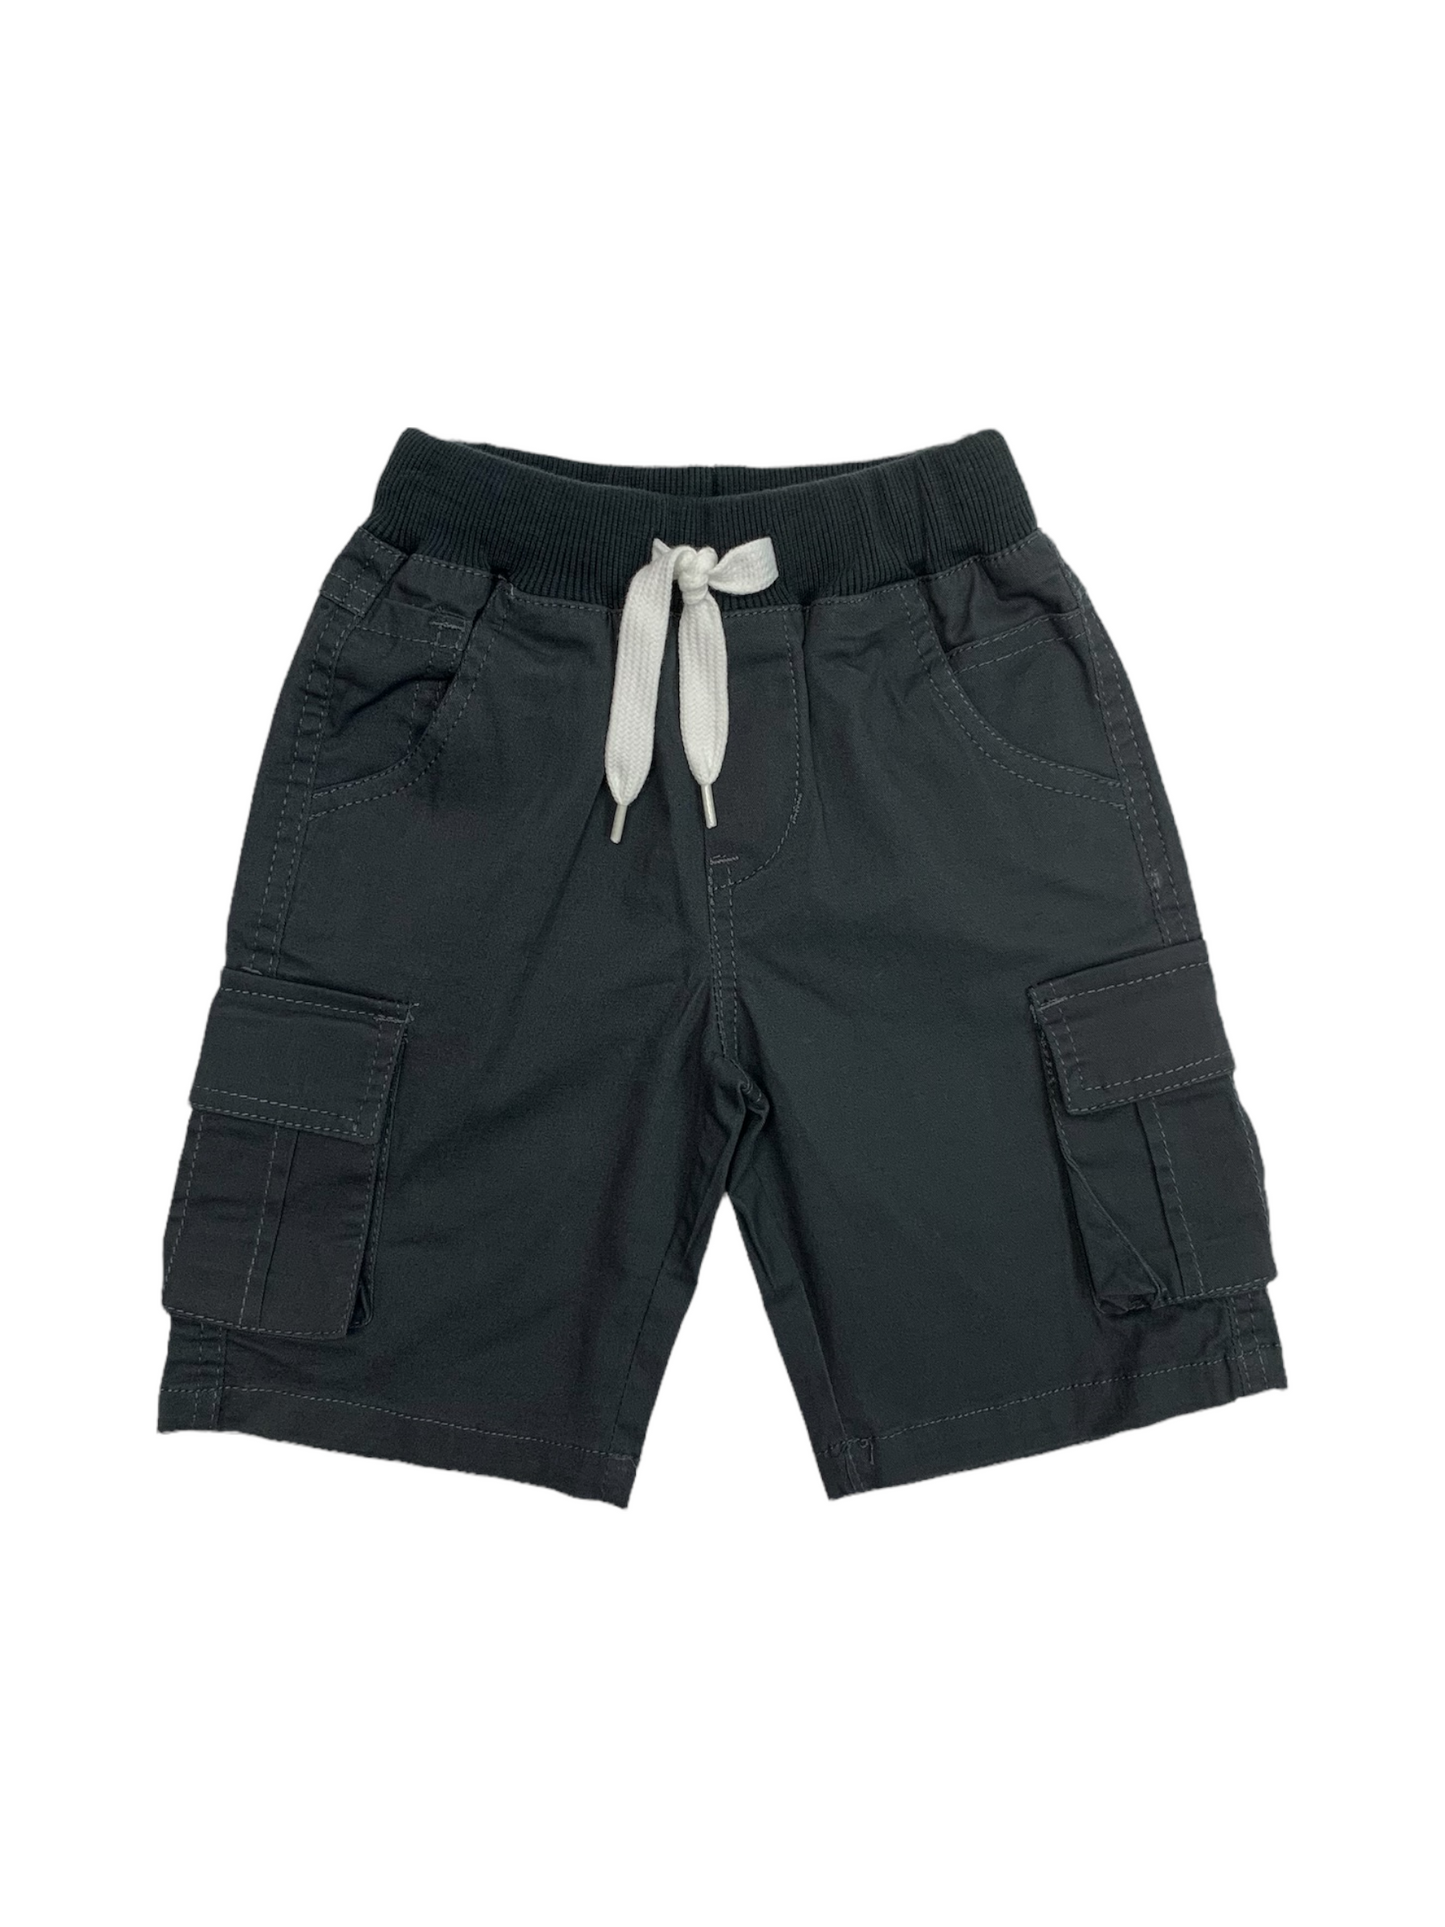 MID gray Bermuda shorts for boys 2 to 7 years